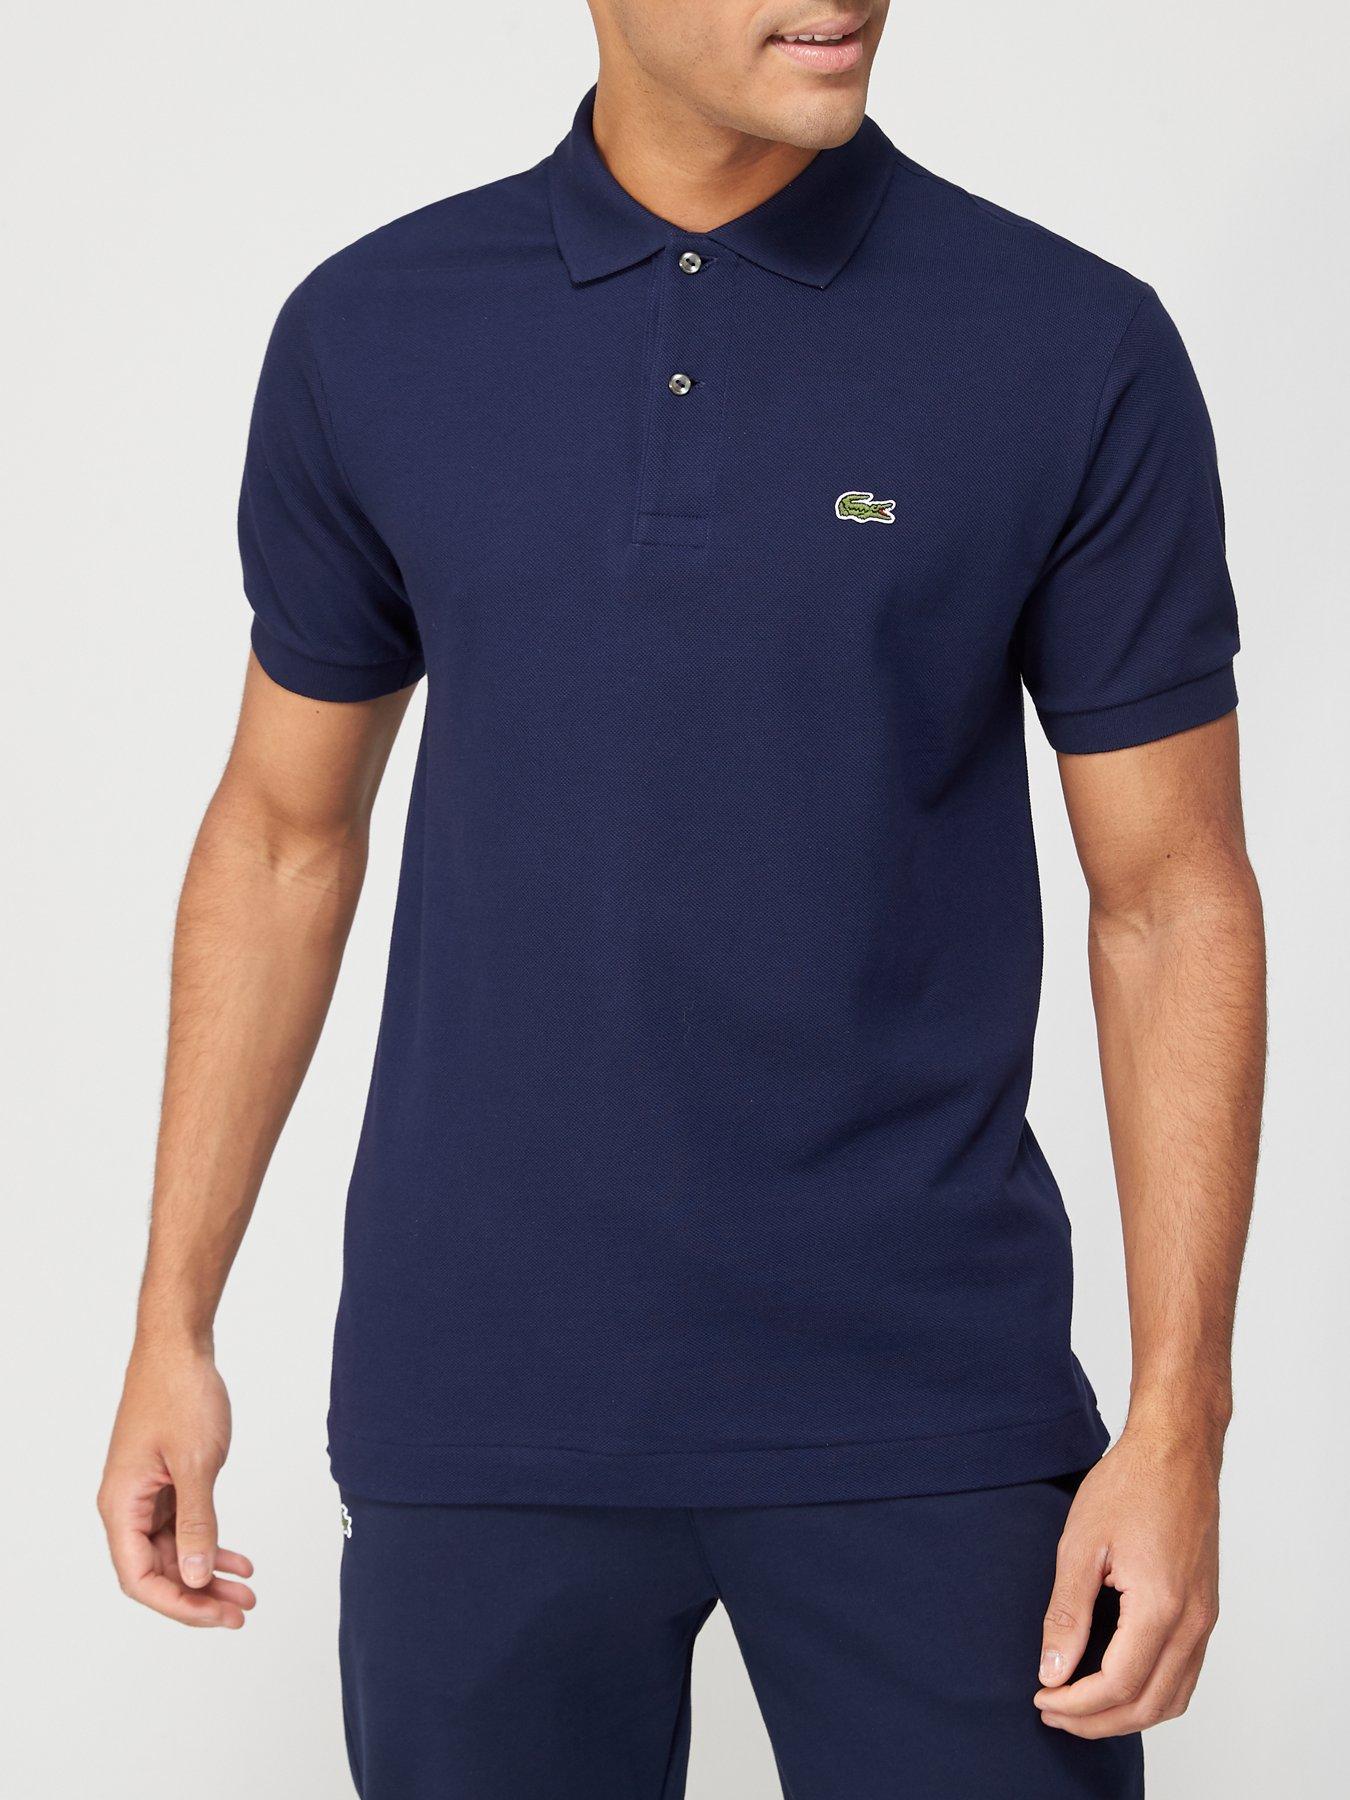 Lacoste Classic Fit L.12.12 Polo Shirt - Navy | Ireland